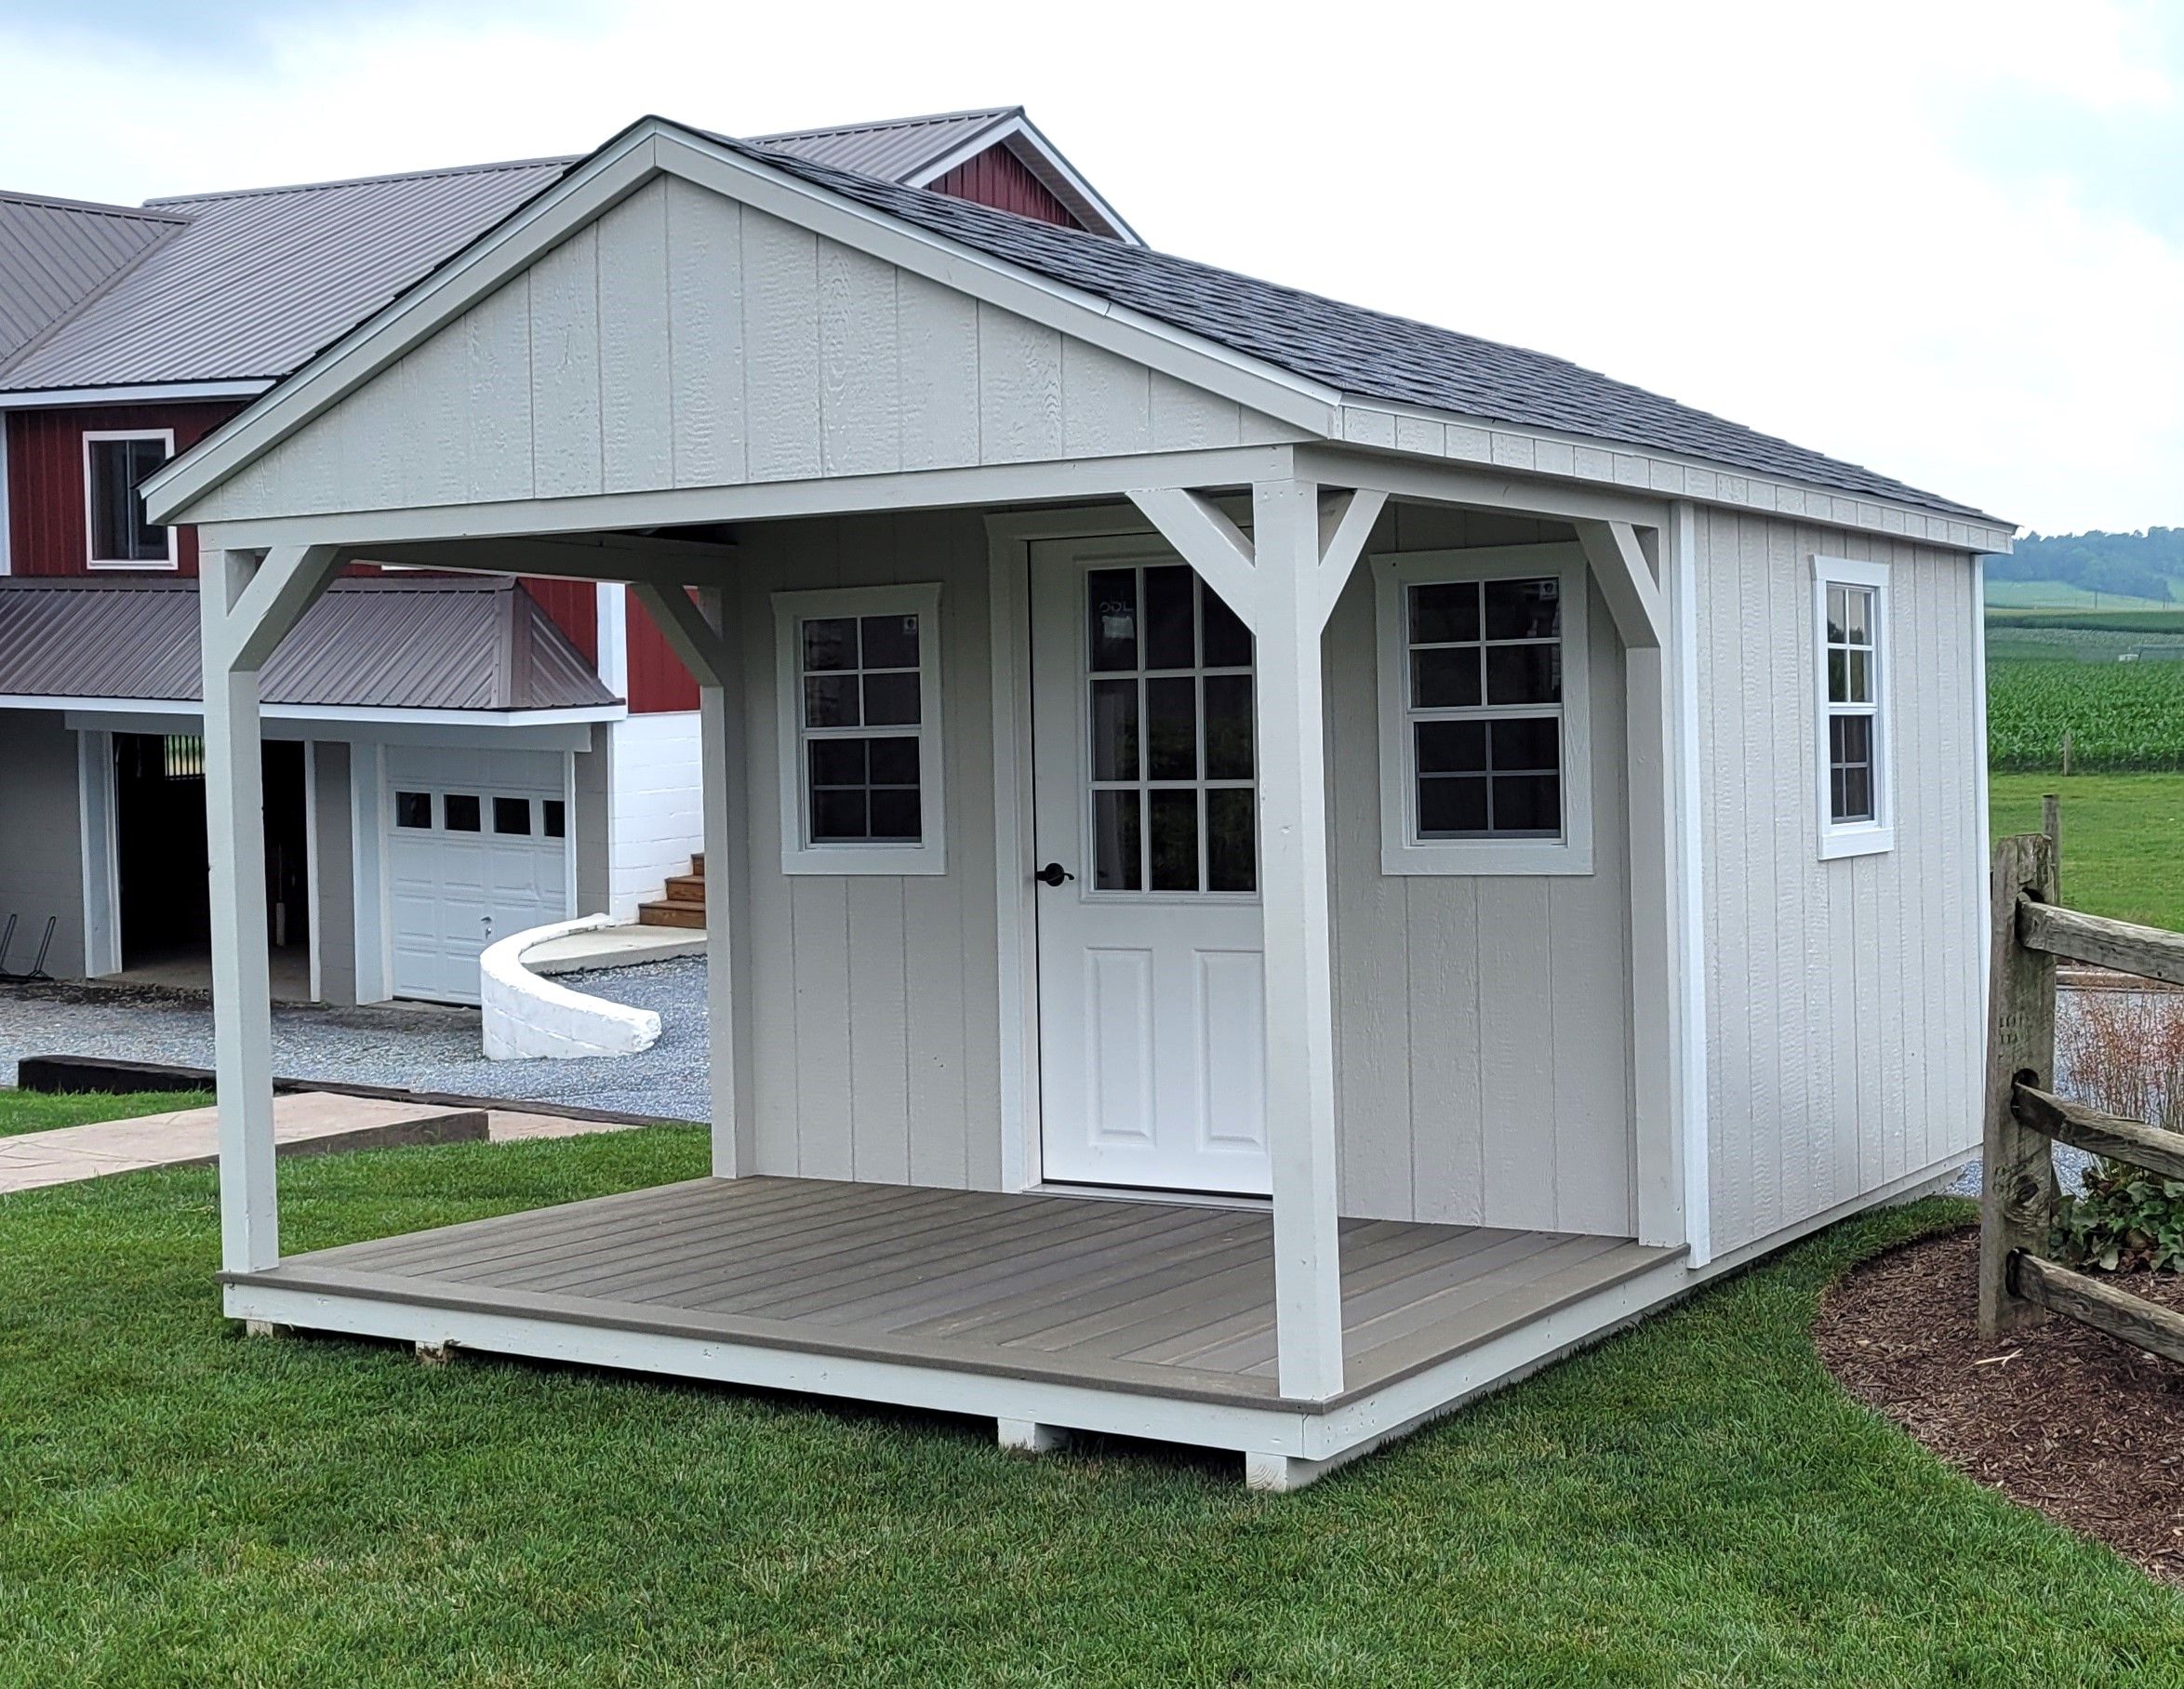 All Photos for Pond View Mini Structures in  Strasburg, PA